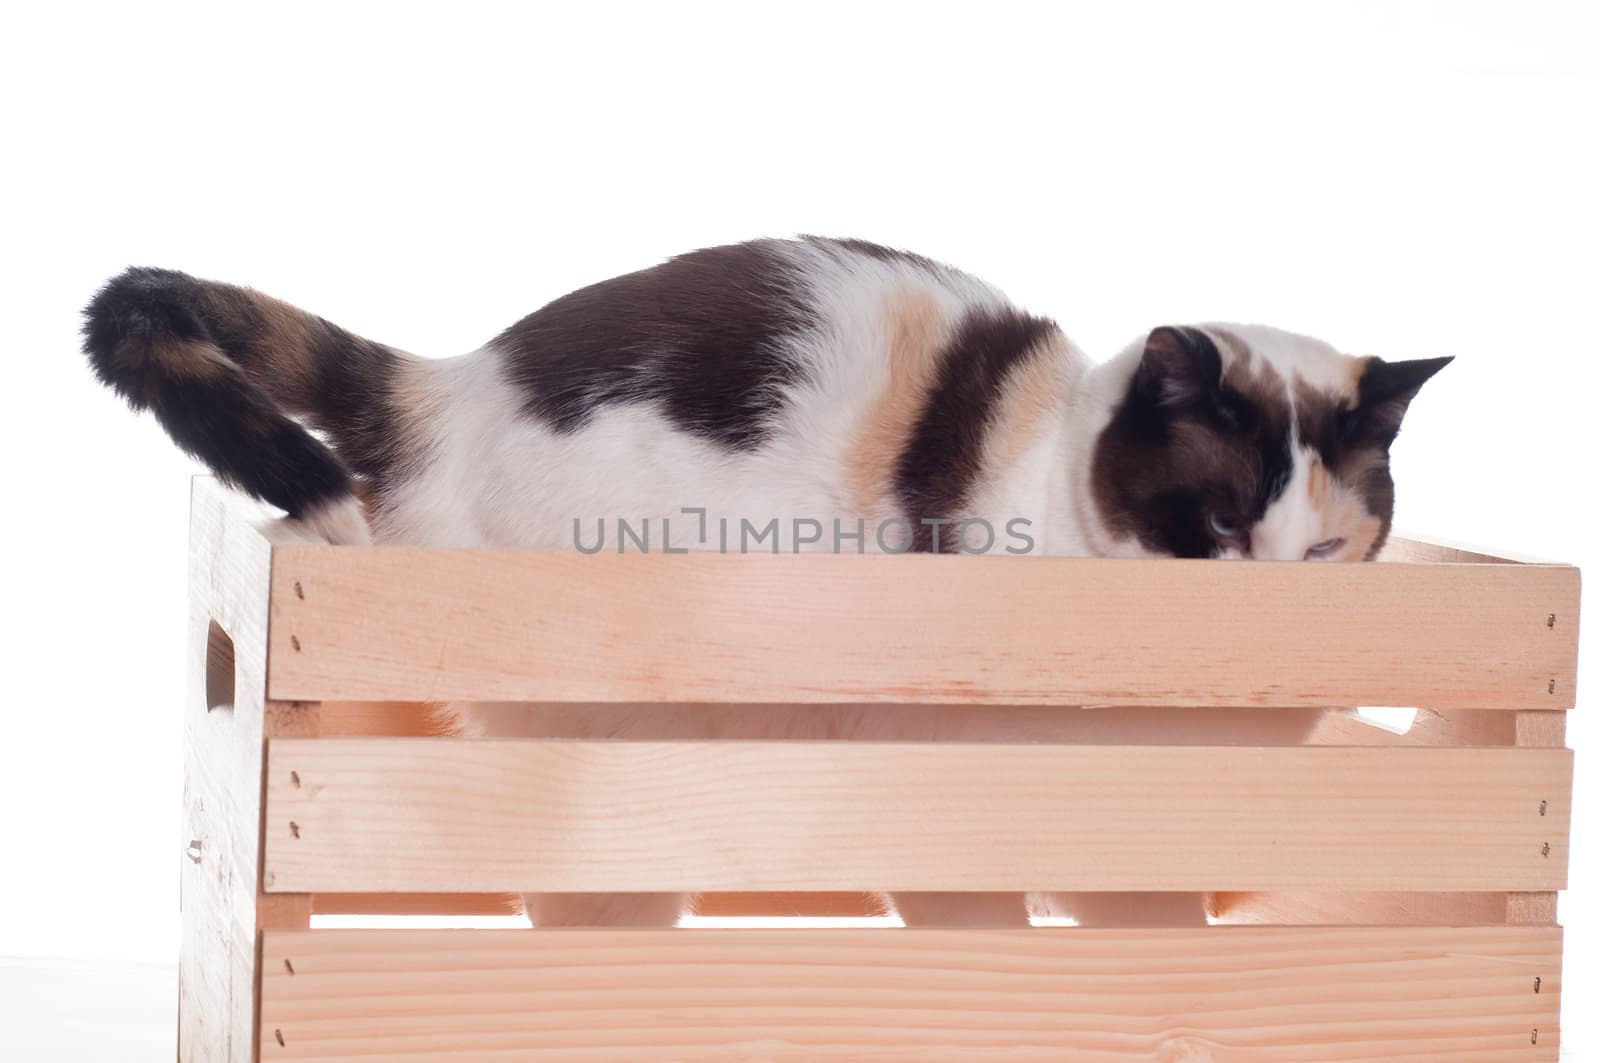 White cat with blue eyes ducking down in a crate ; isolated white background.